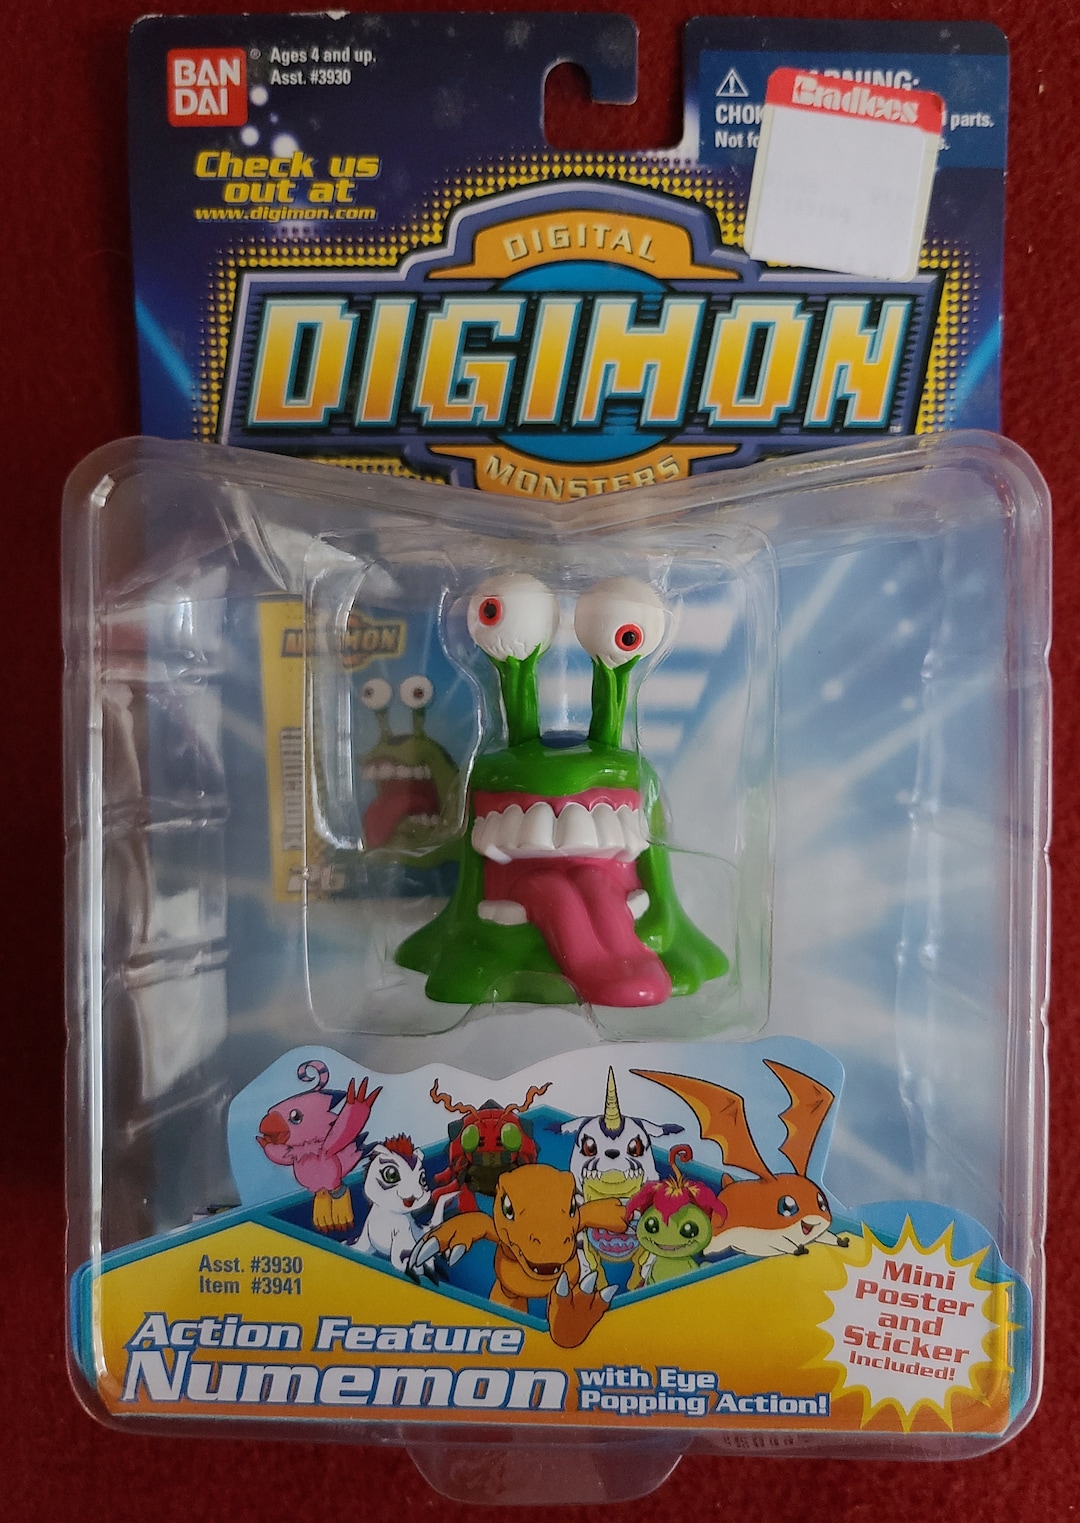 DIGIMON GHOST GAME - FUJI TELEVISION NETWORK, INC.